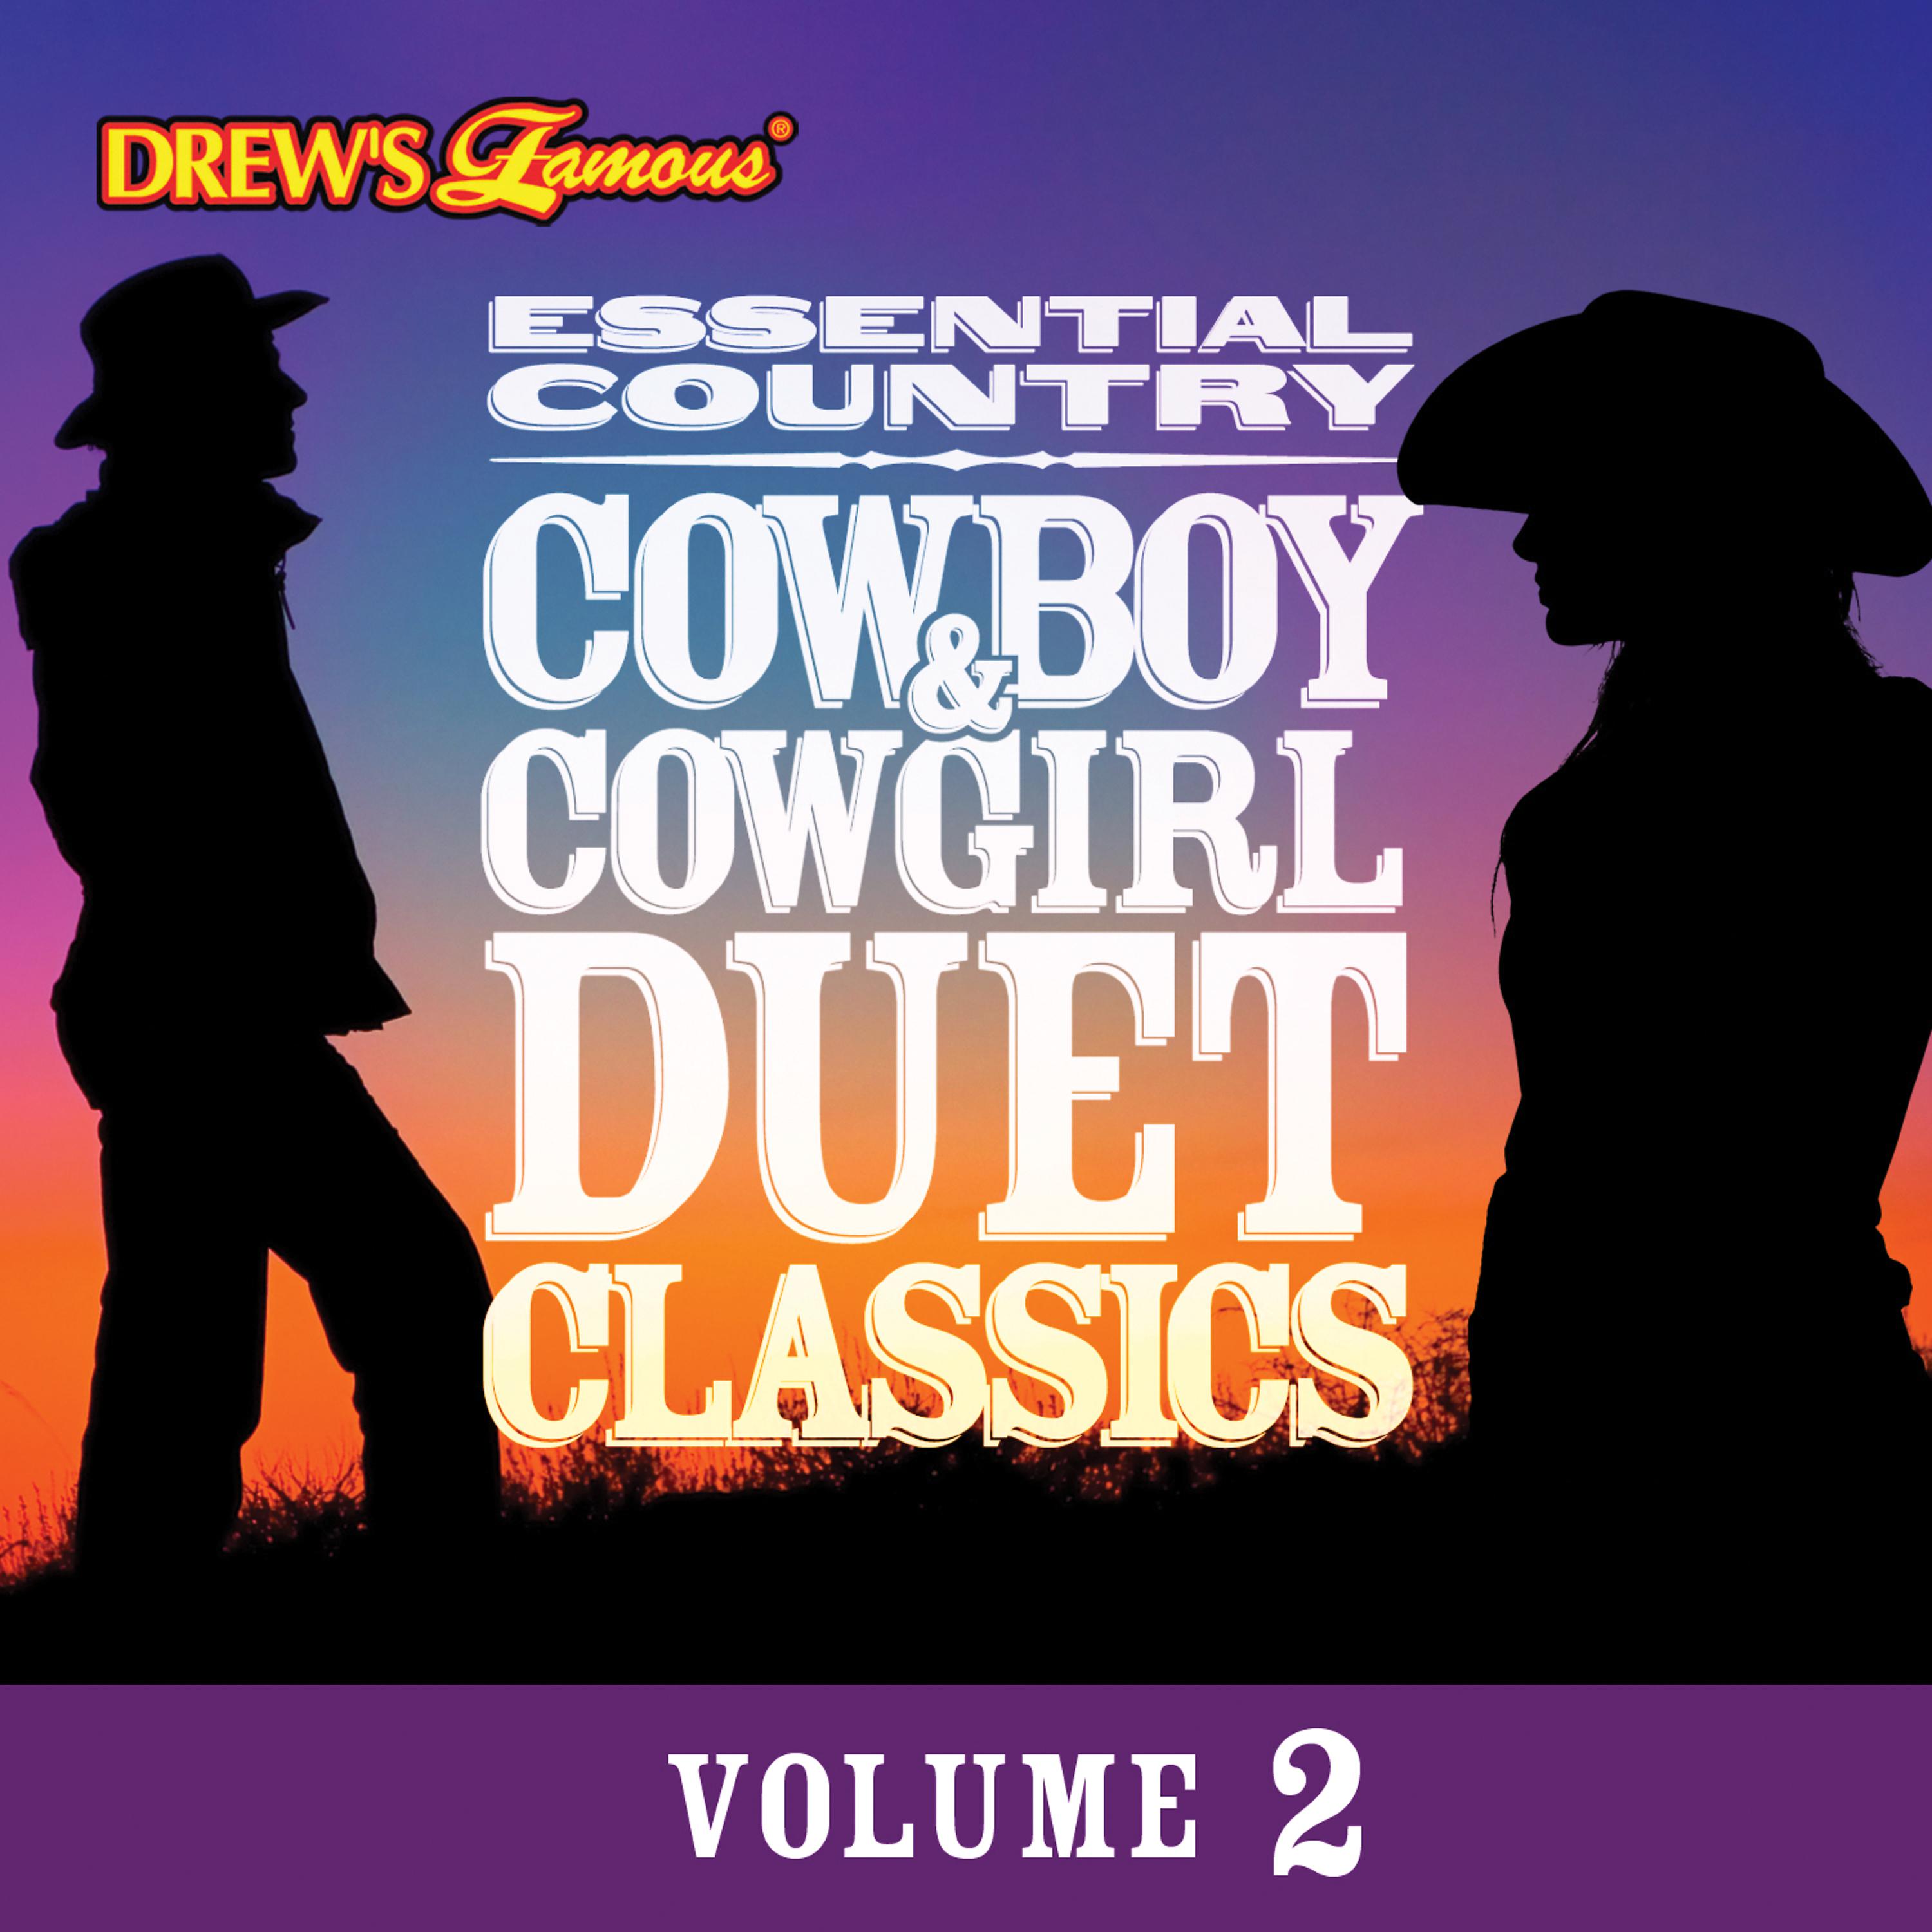 Постер альбома Essential Country: Cowboy & Cowgirl Duet Classics, Vol. 2